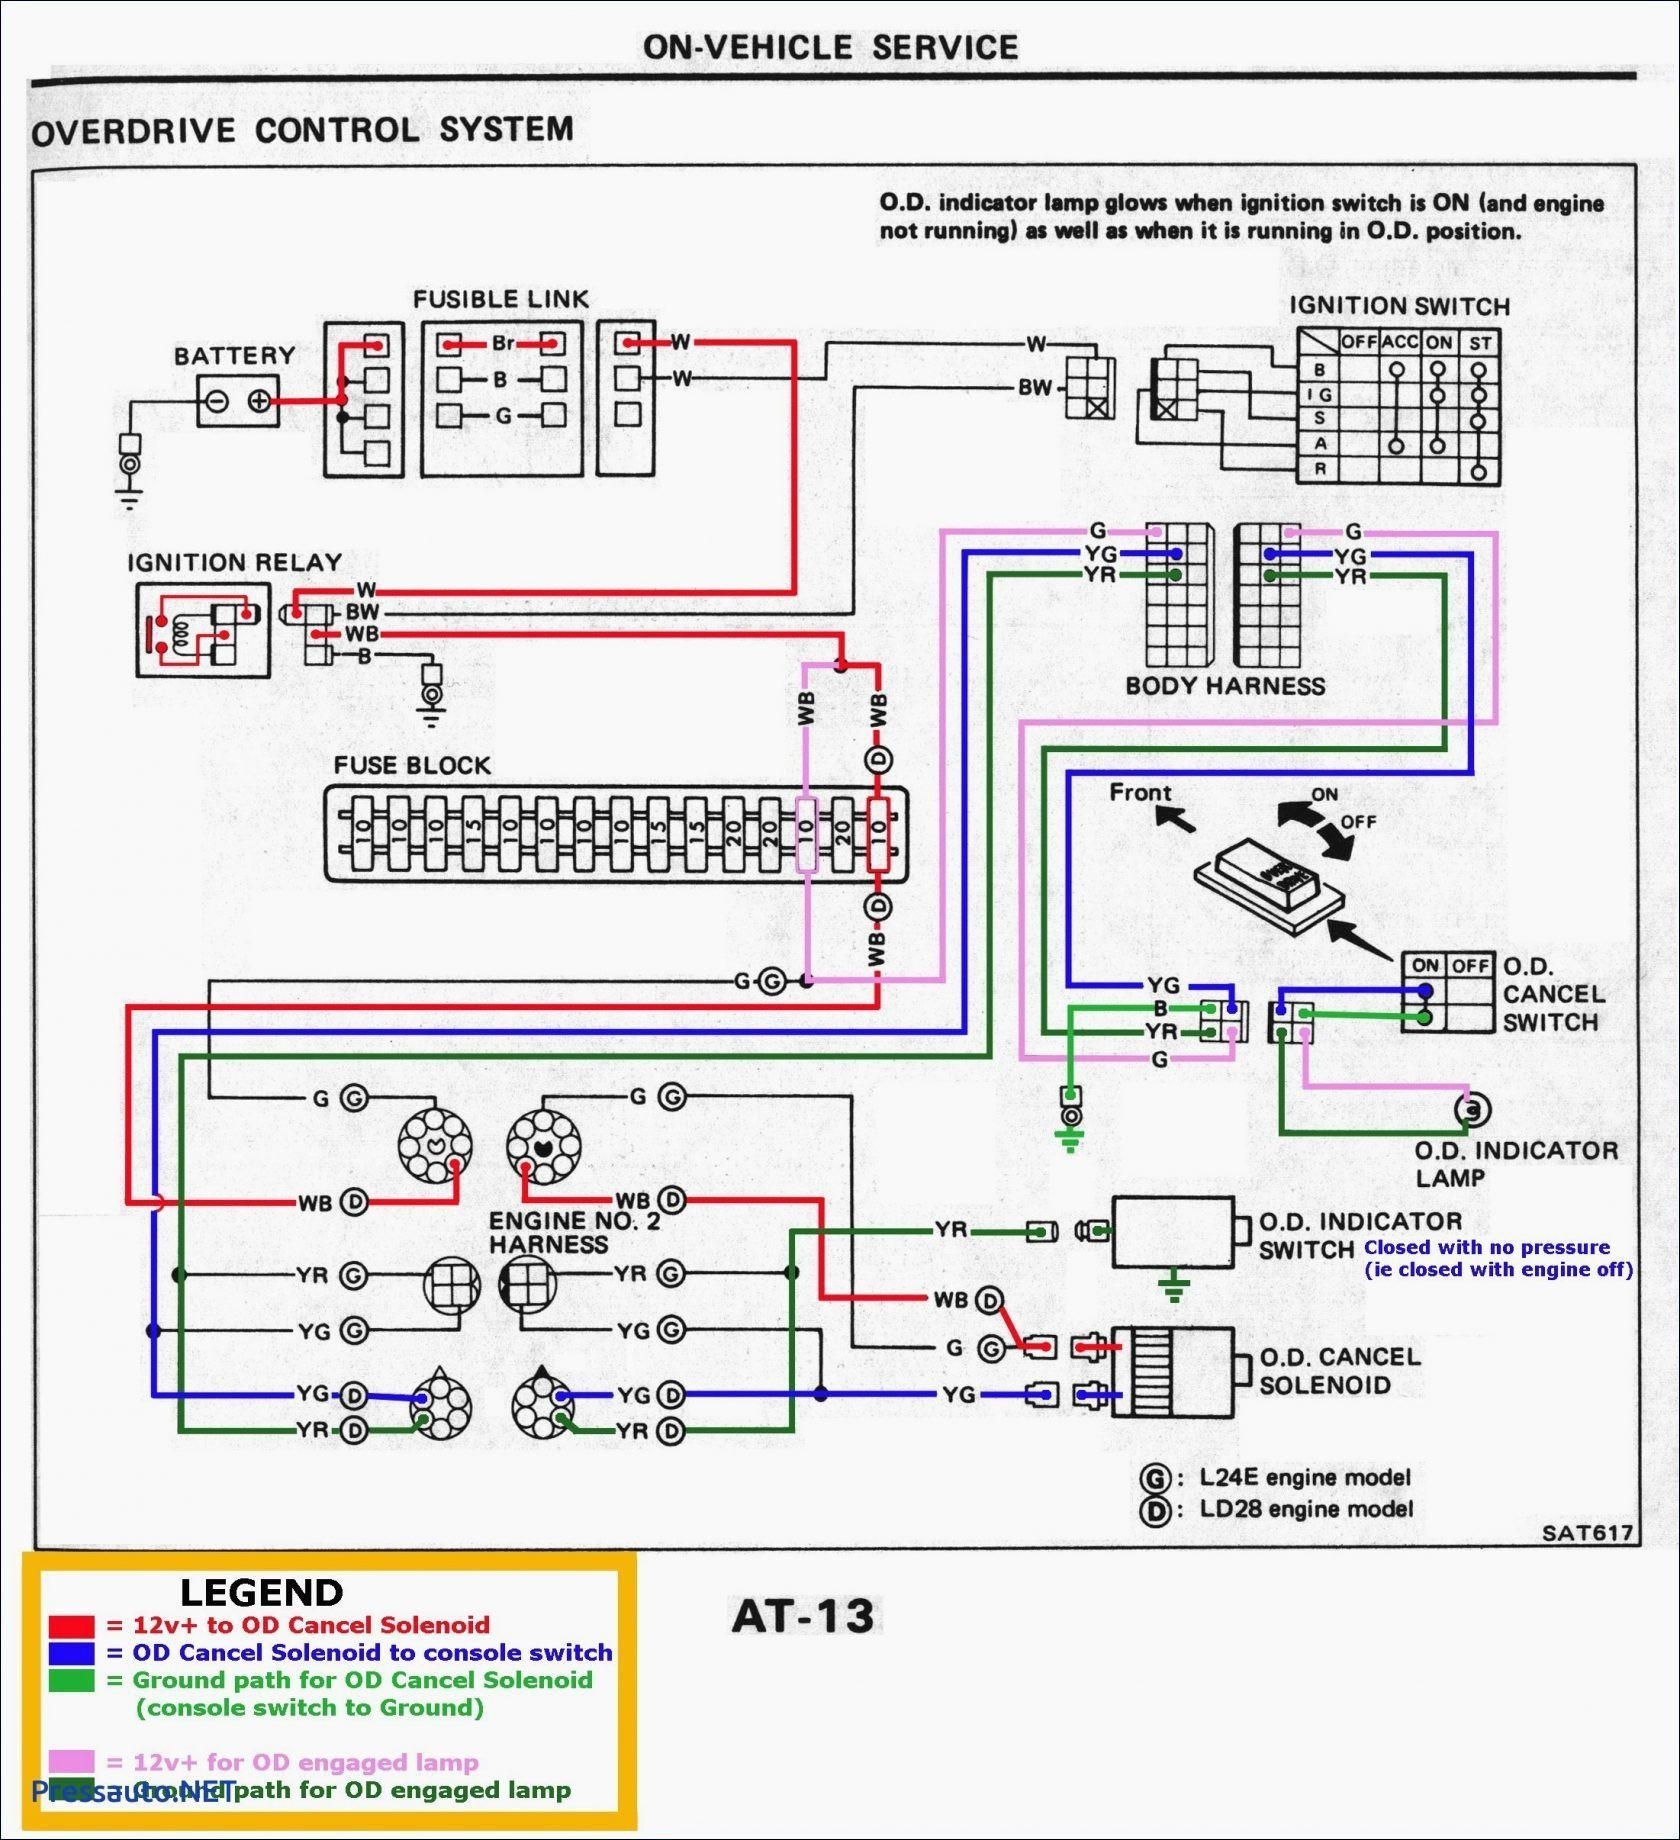 Wiring Diagram for Two Lights From e Switch Best Wiring Diagram for Two Lights E Switch